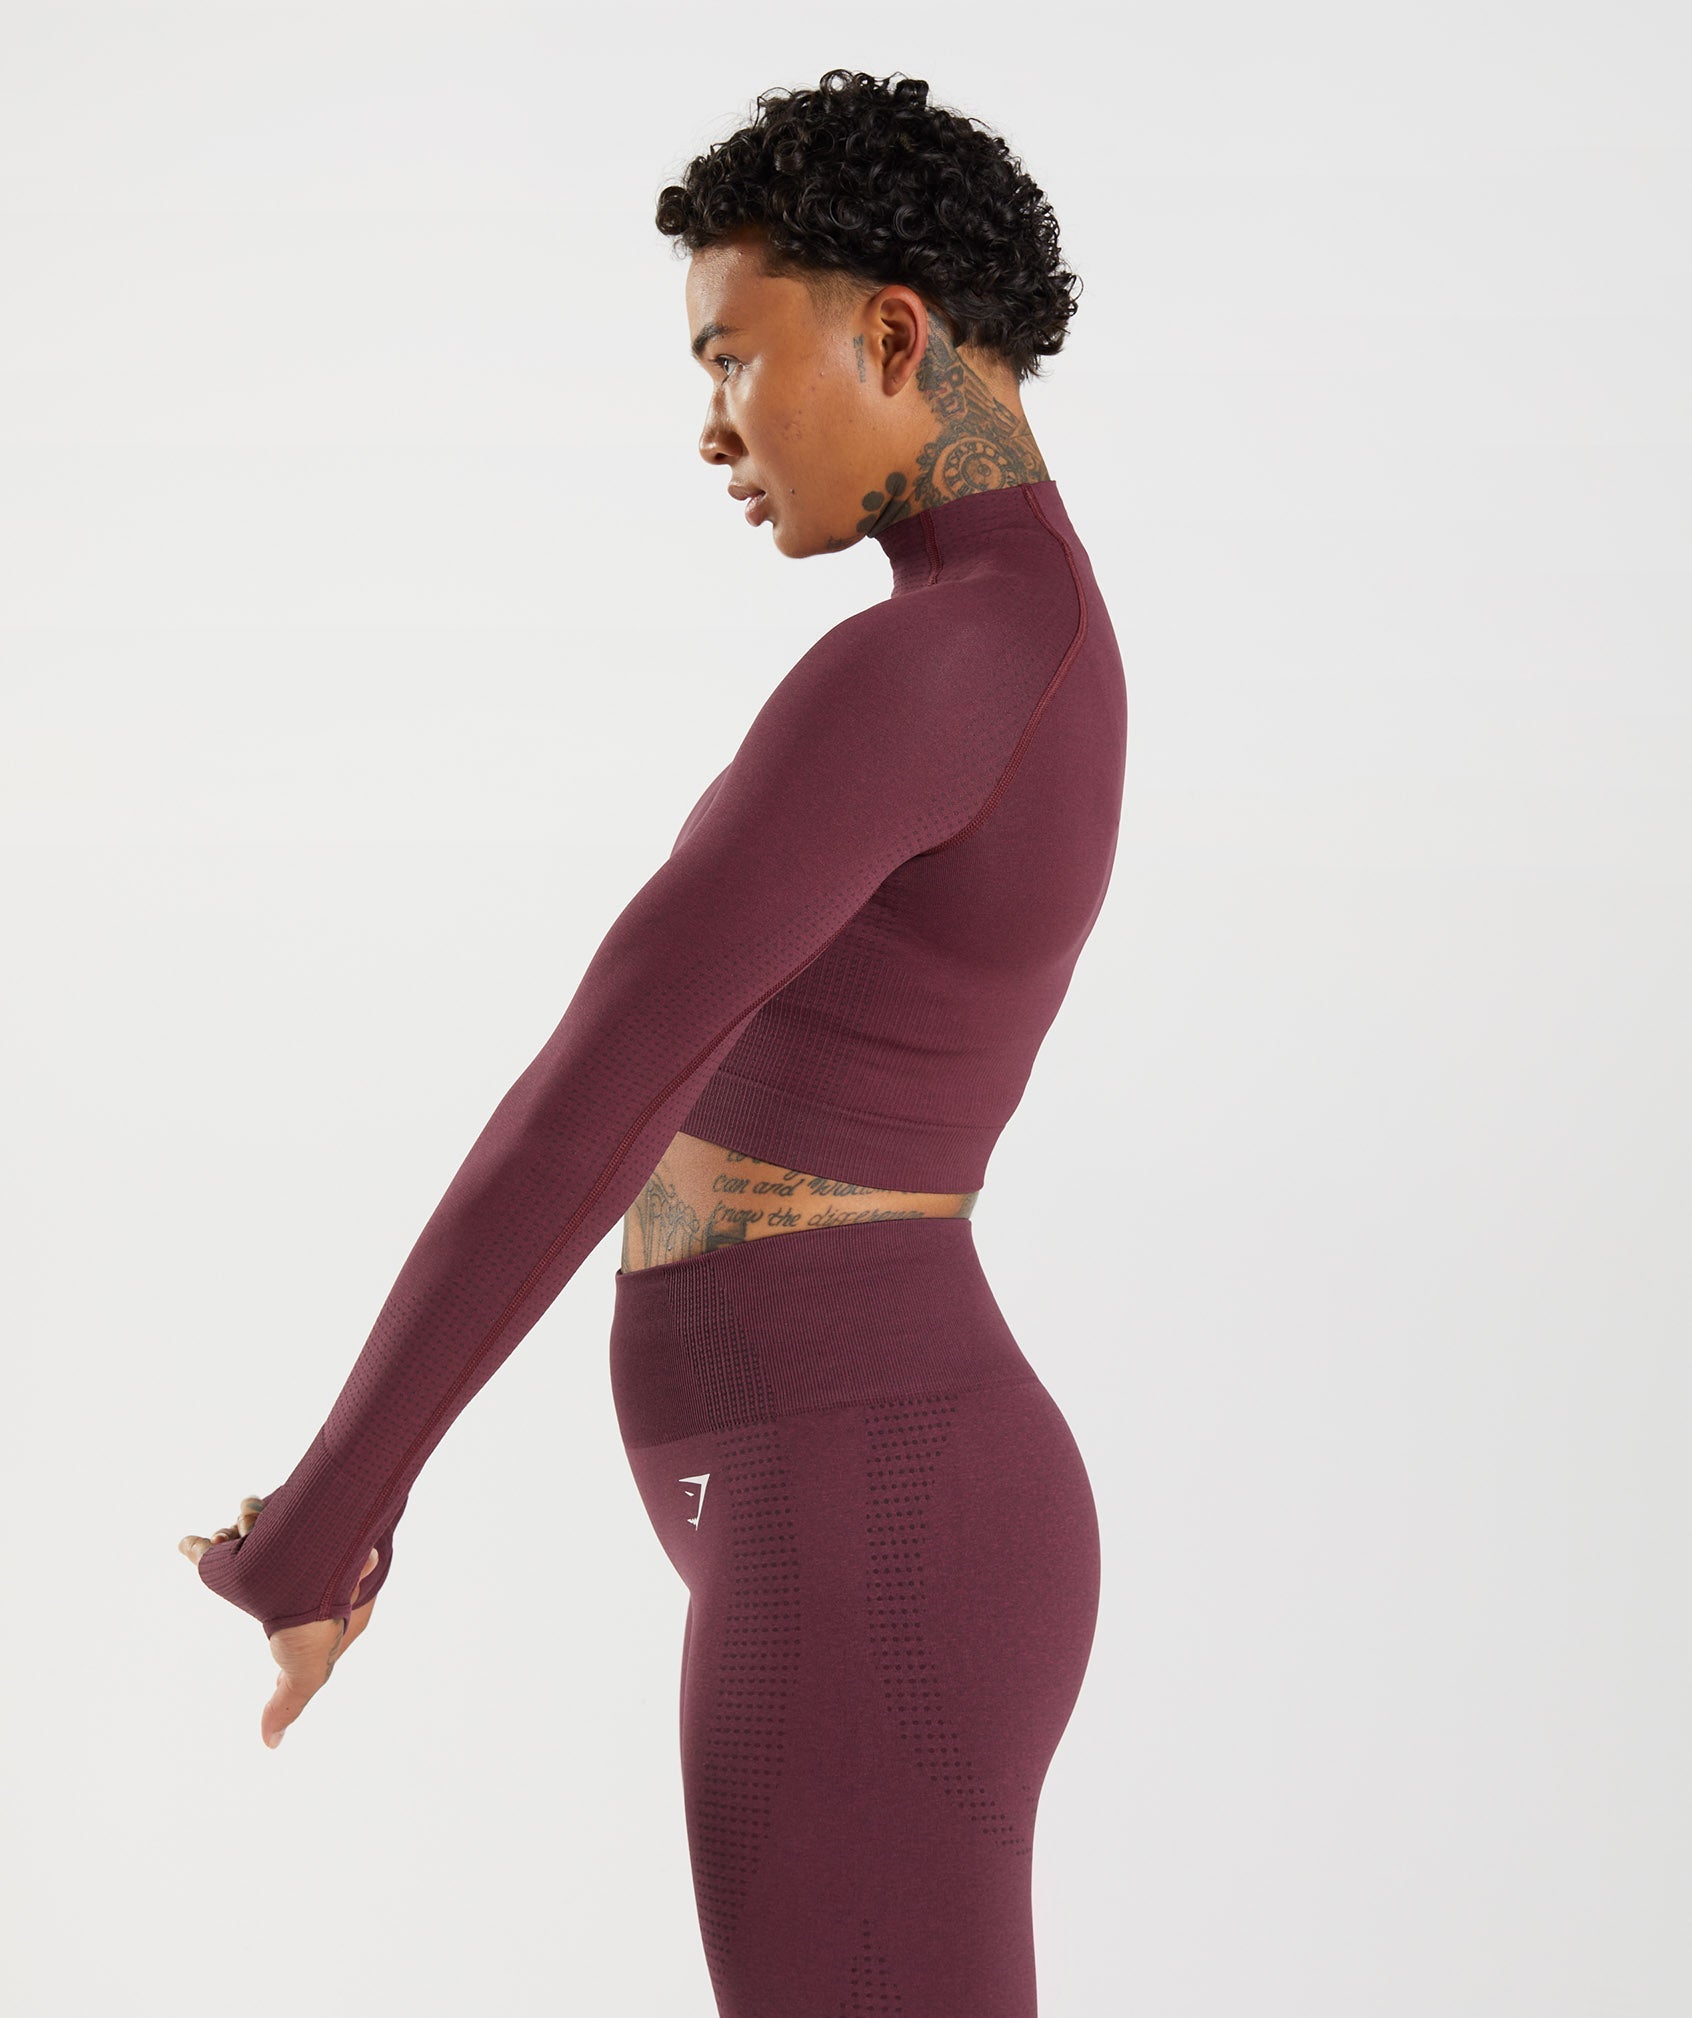 Vital Seamless 2.0 High Neck Midi Top in Baked Maroon Marl - view 3